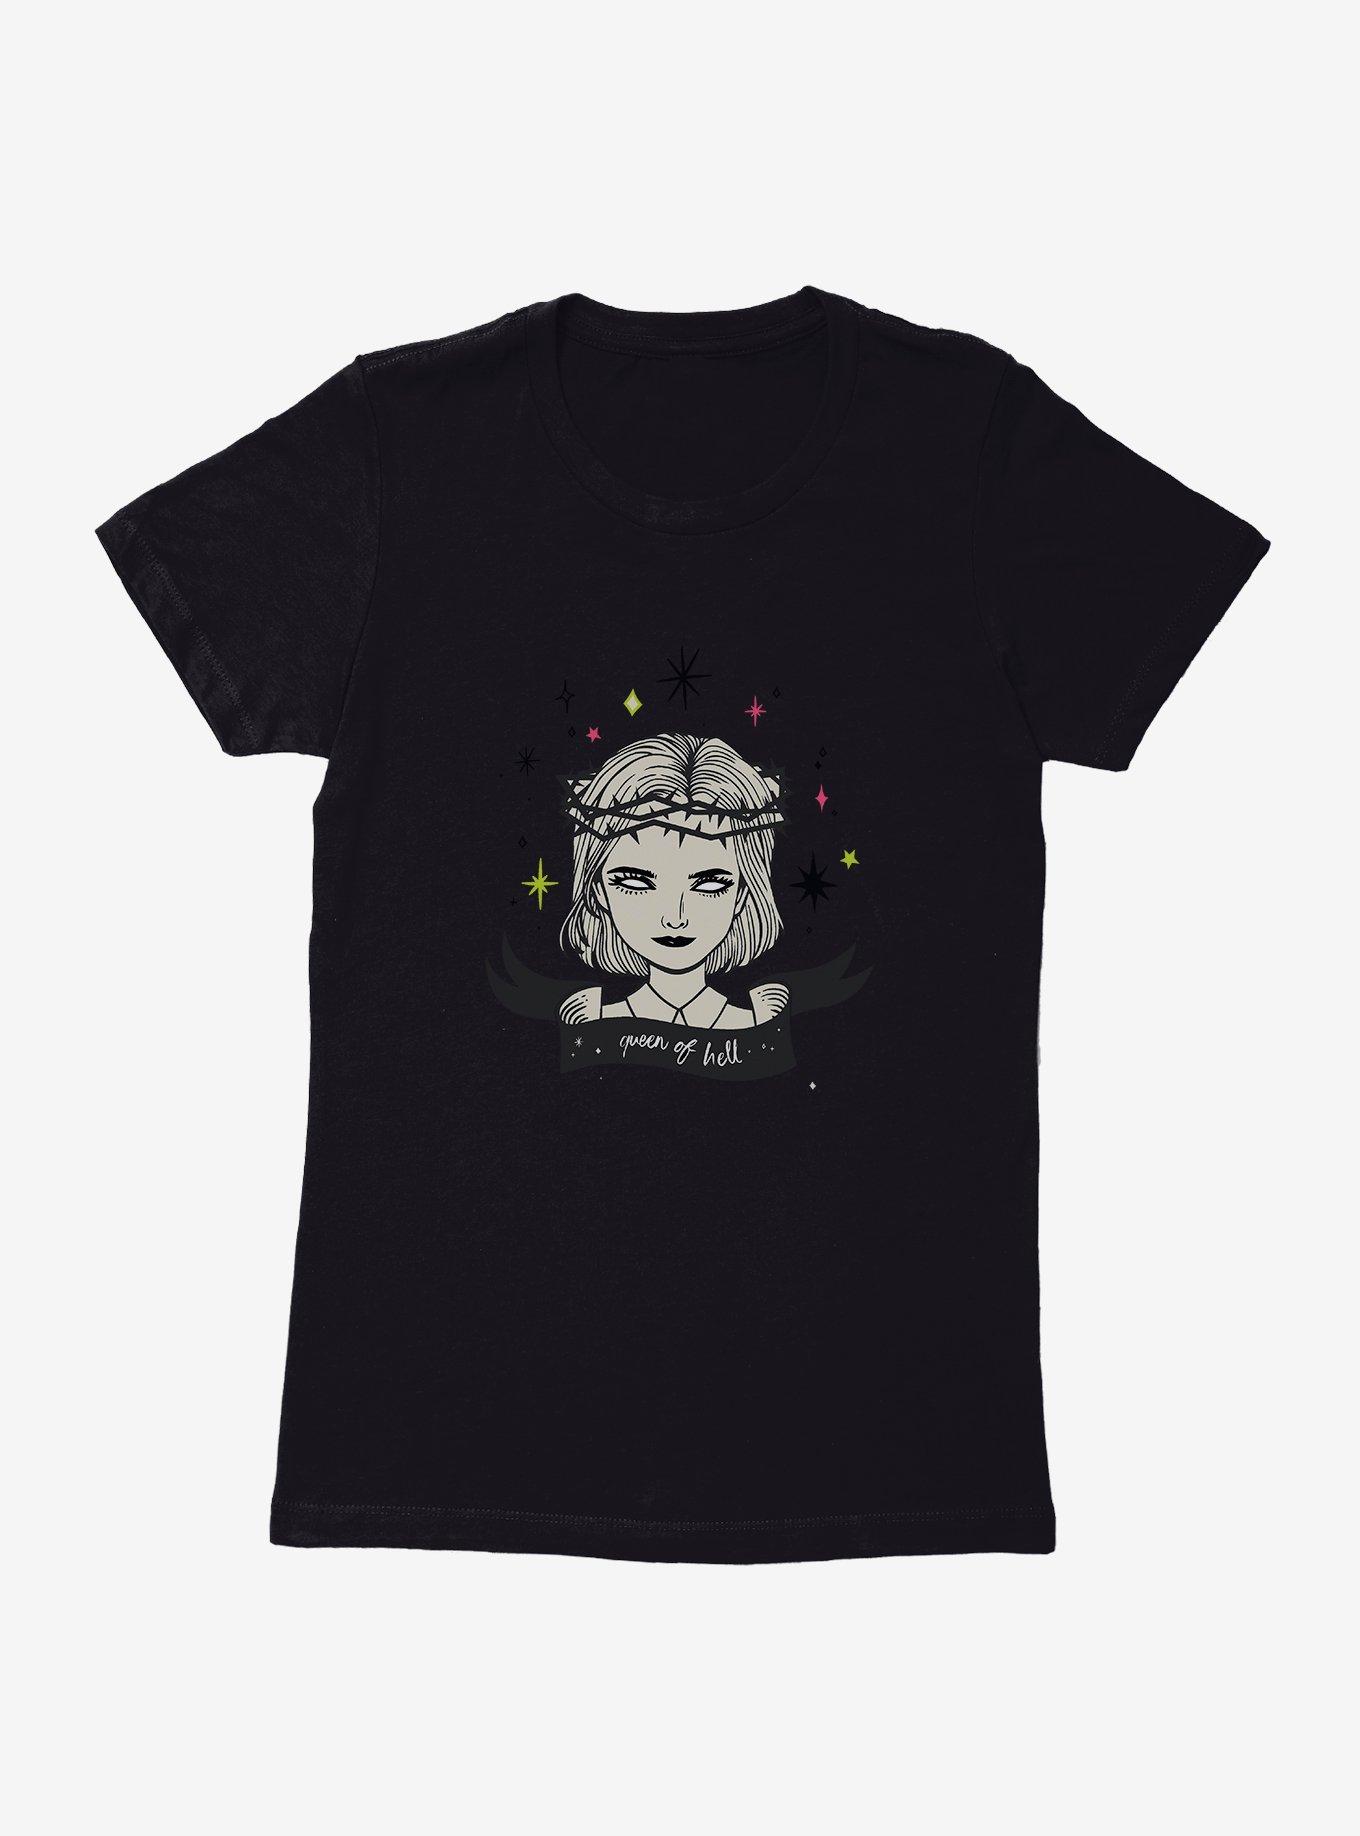 Chilling Adventures Of Sabrina Queen Of Hell Womens T-Shirt, , hi-res